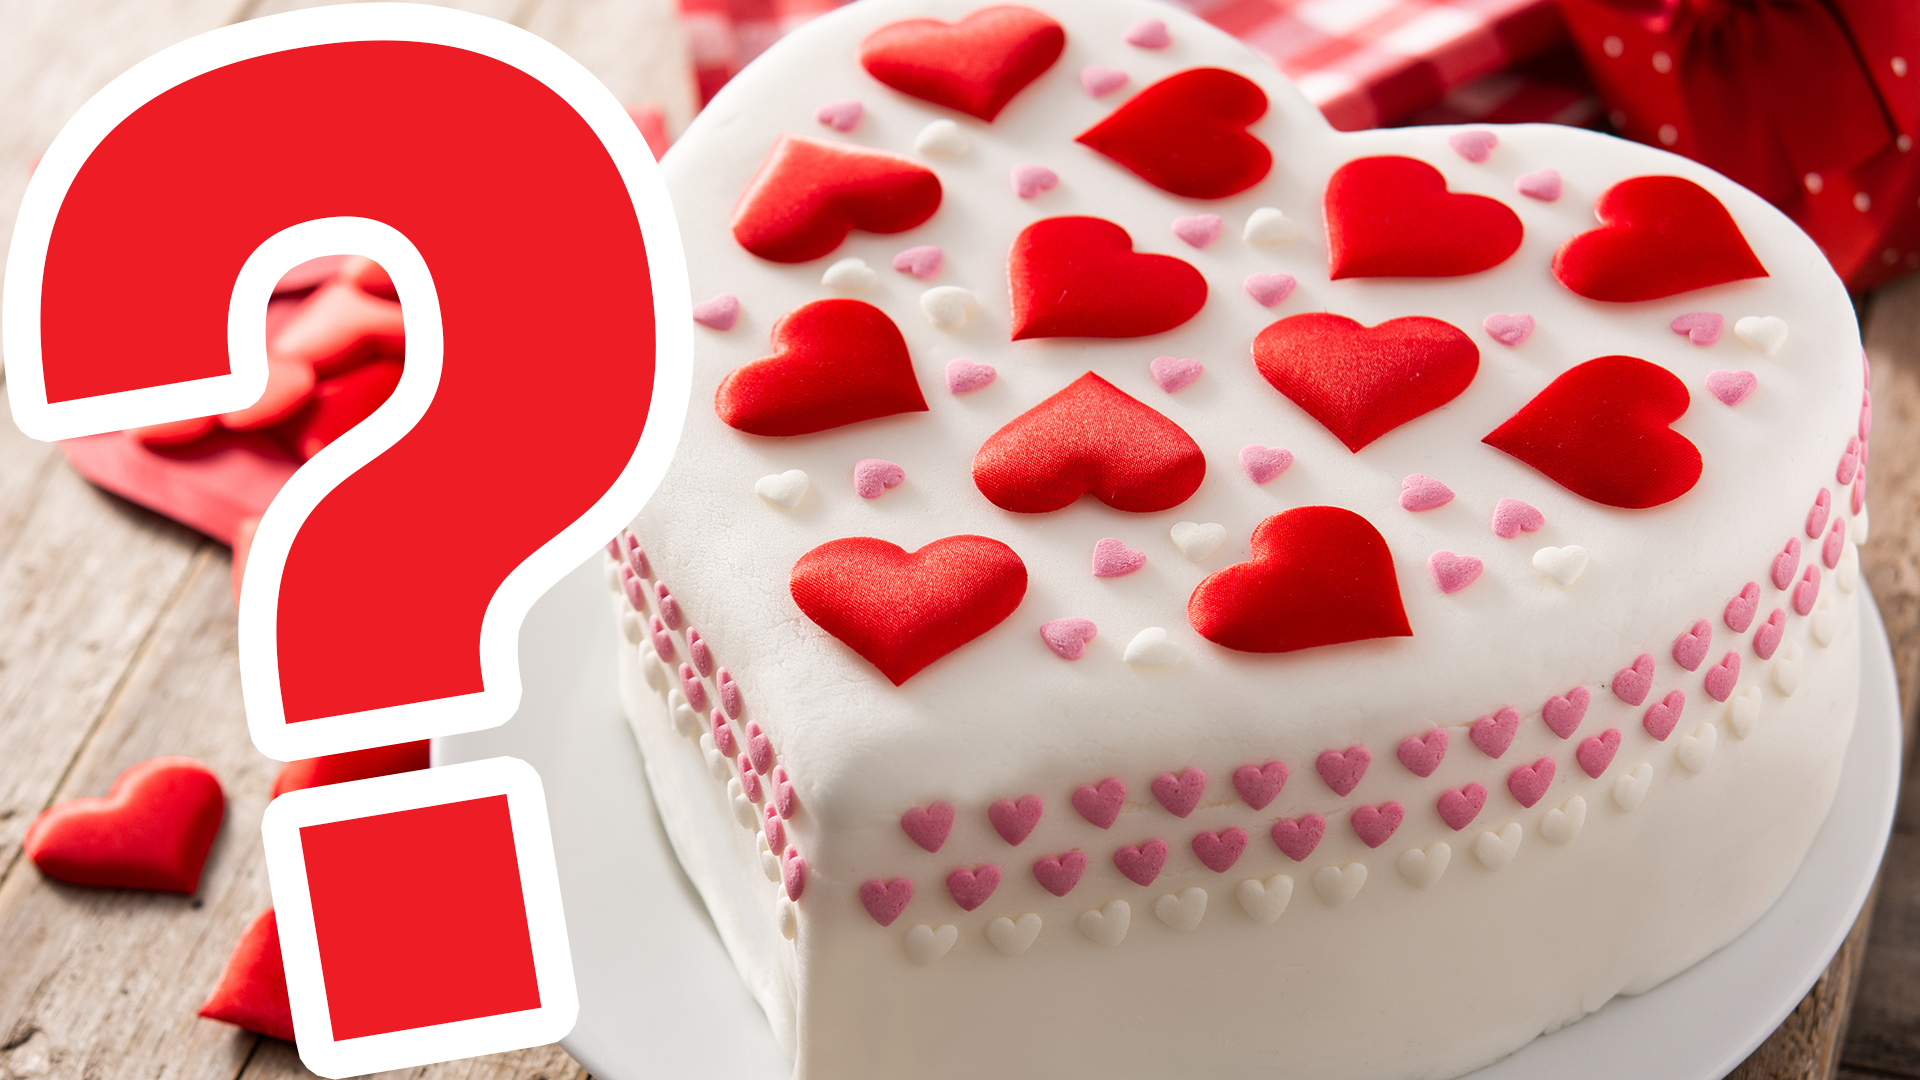 Question mark and heart shaped cake